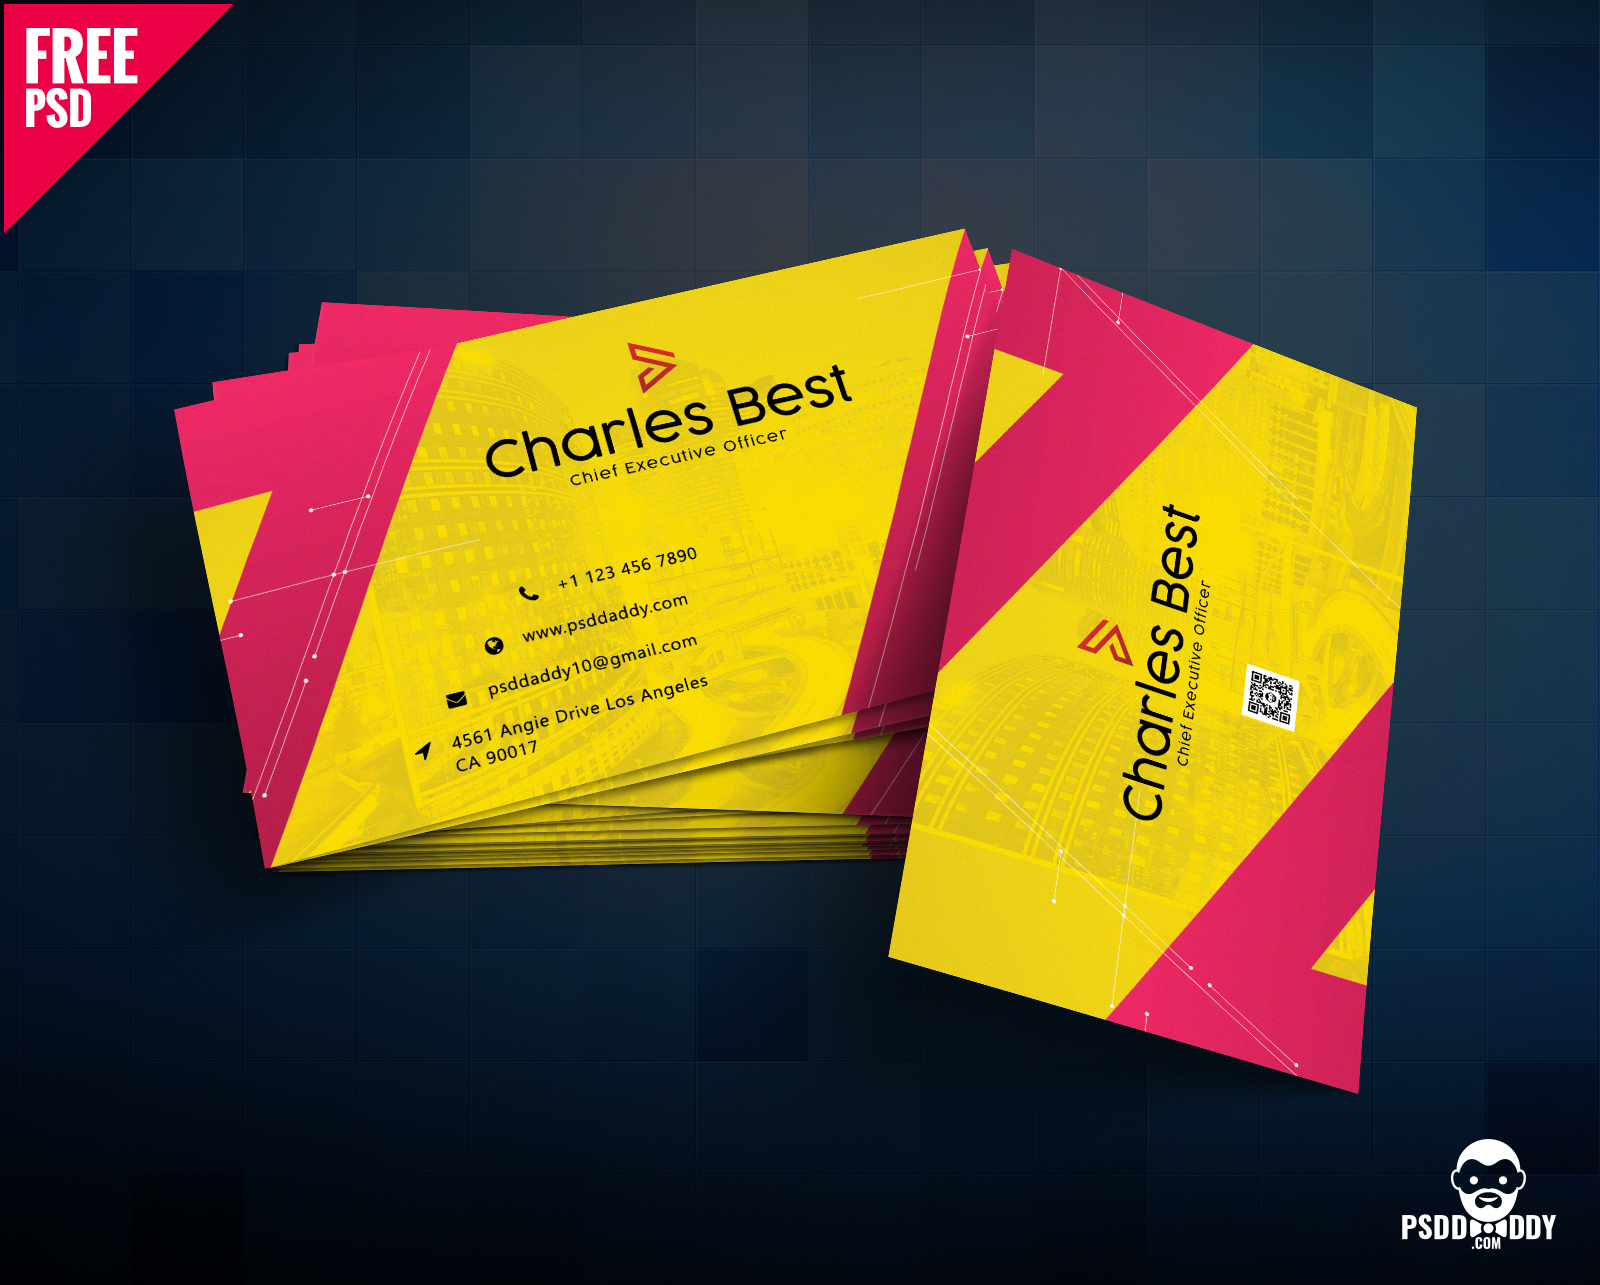 Download] Creative Business Card Free Psd | Psddaddy With Regard To Visiting Card Templates Download